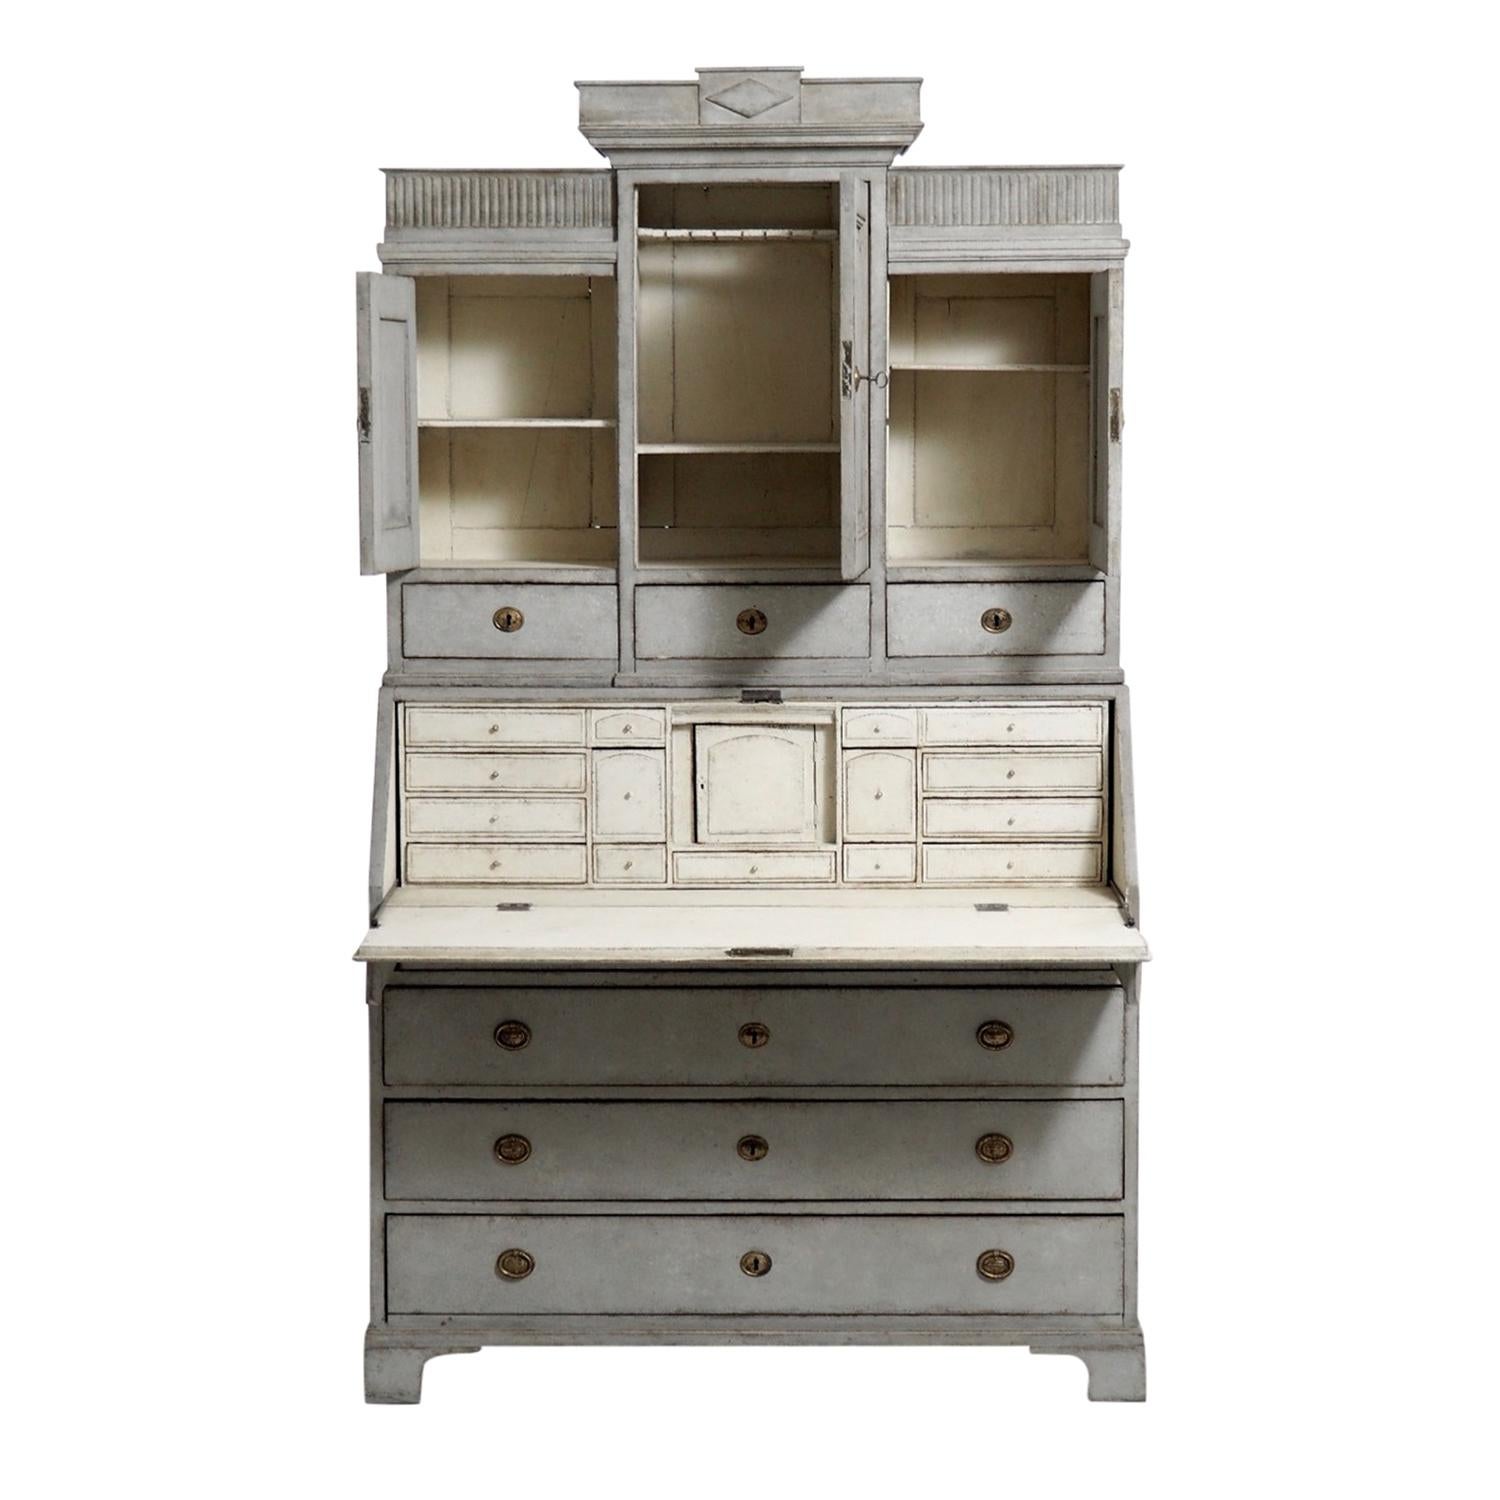 A 18th century, dark-grey antique Swedish Gustavian three part bureau, secretaire made of hand crafted painted Pinewood, in good condition. The arched upper section of the Scandinavian writing table is composed with three upper doors, three drawers